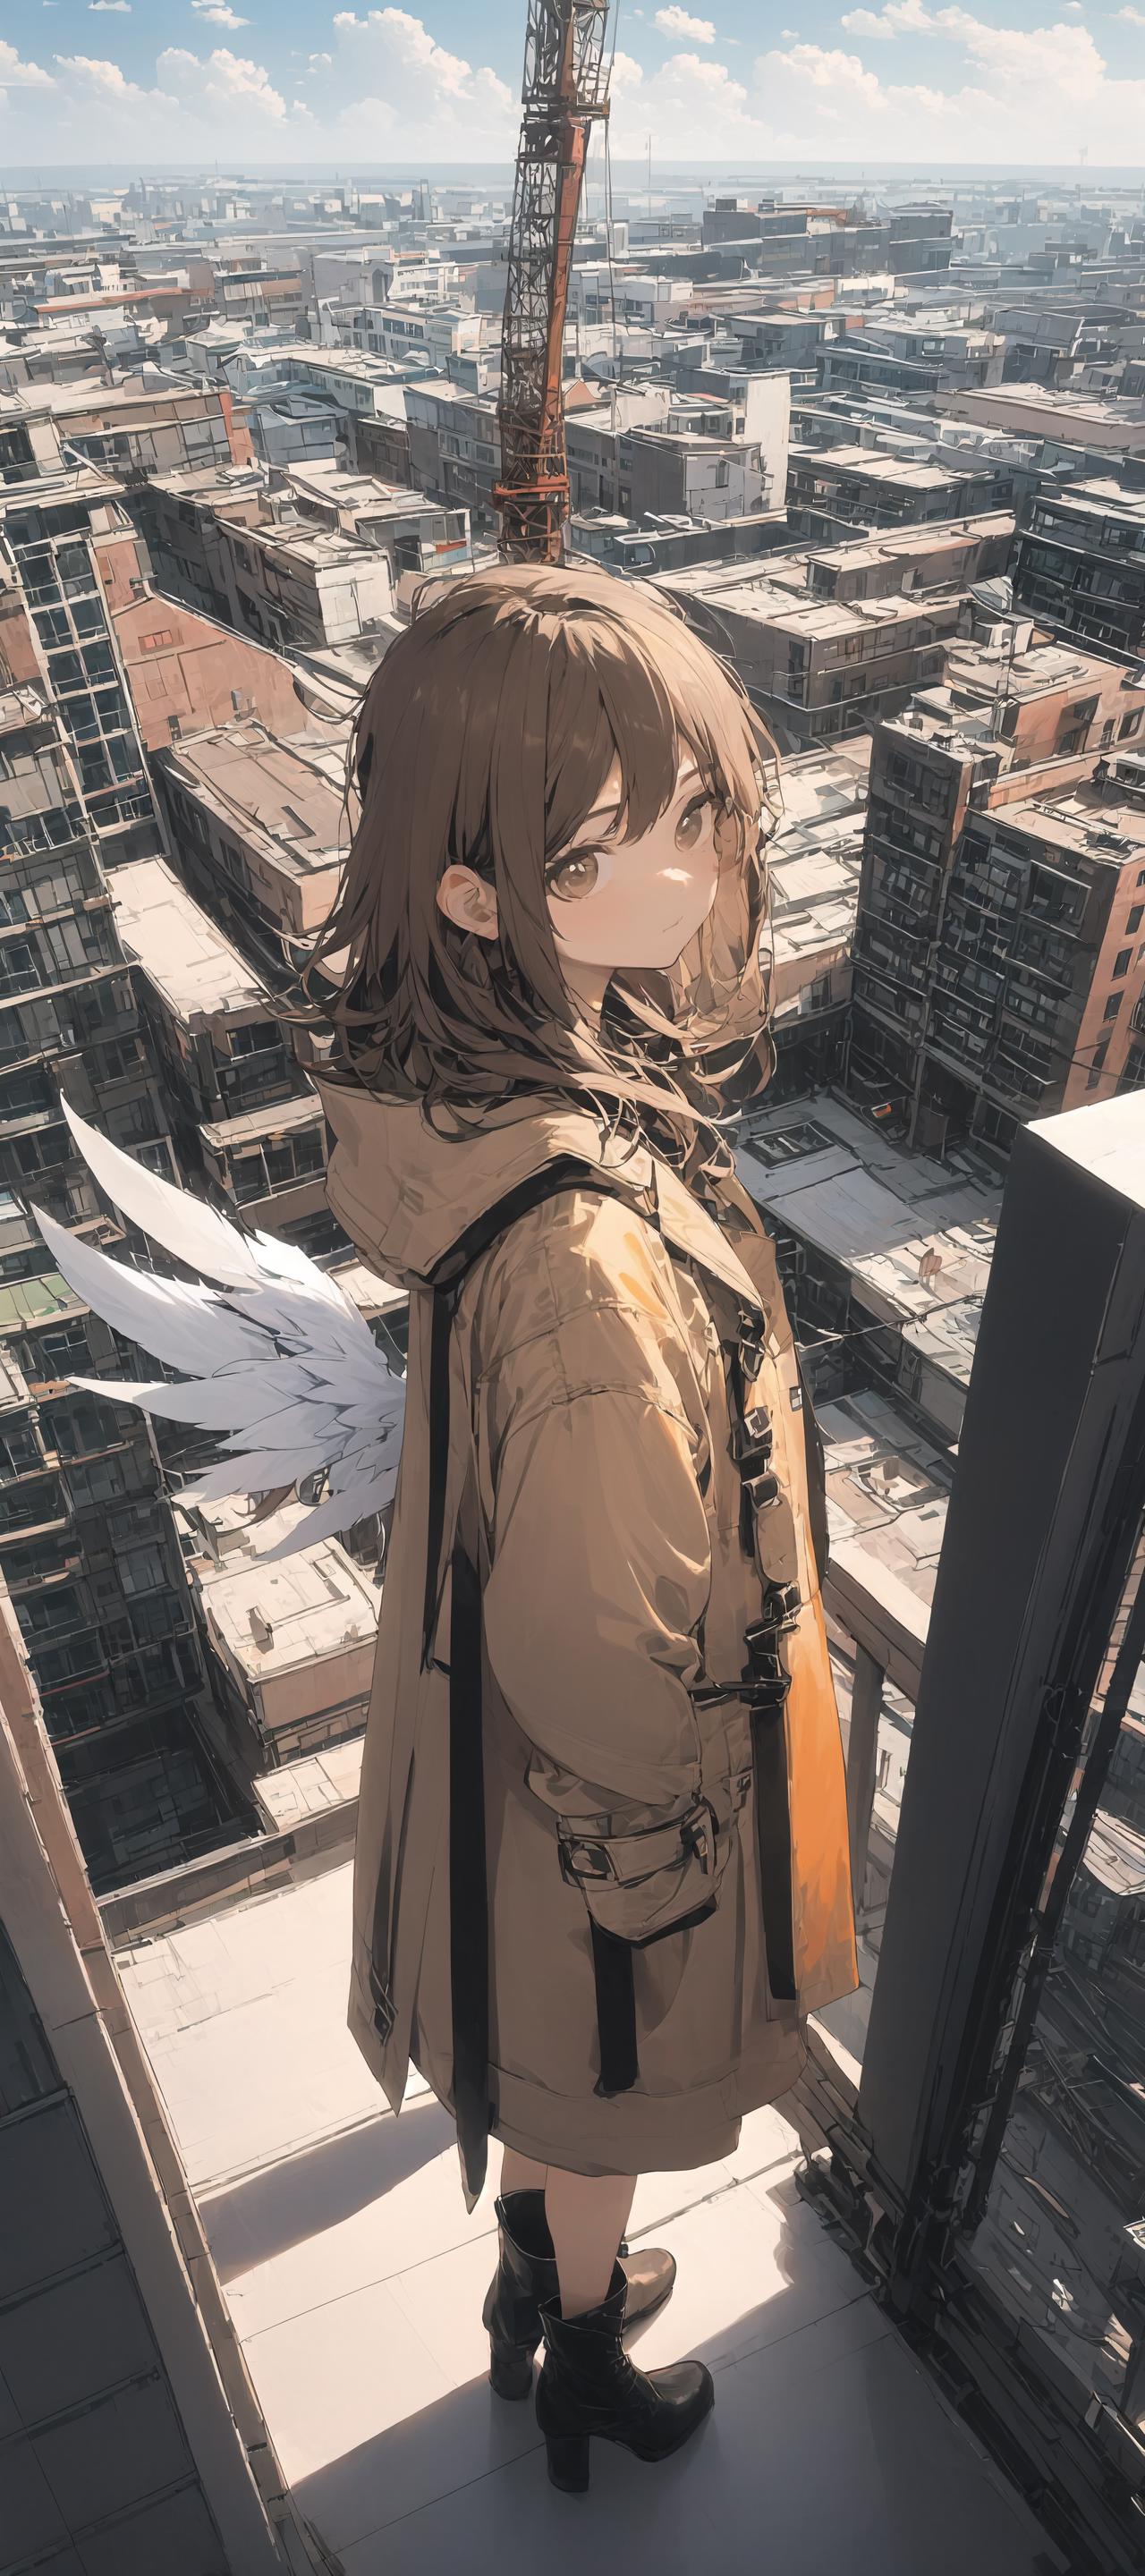 A woman with wings standing in a city.